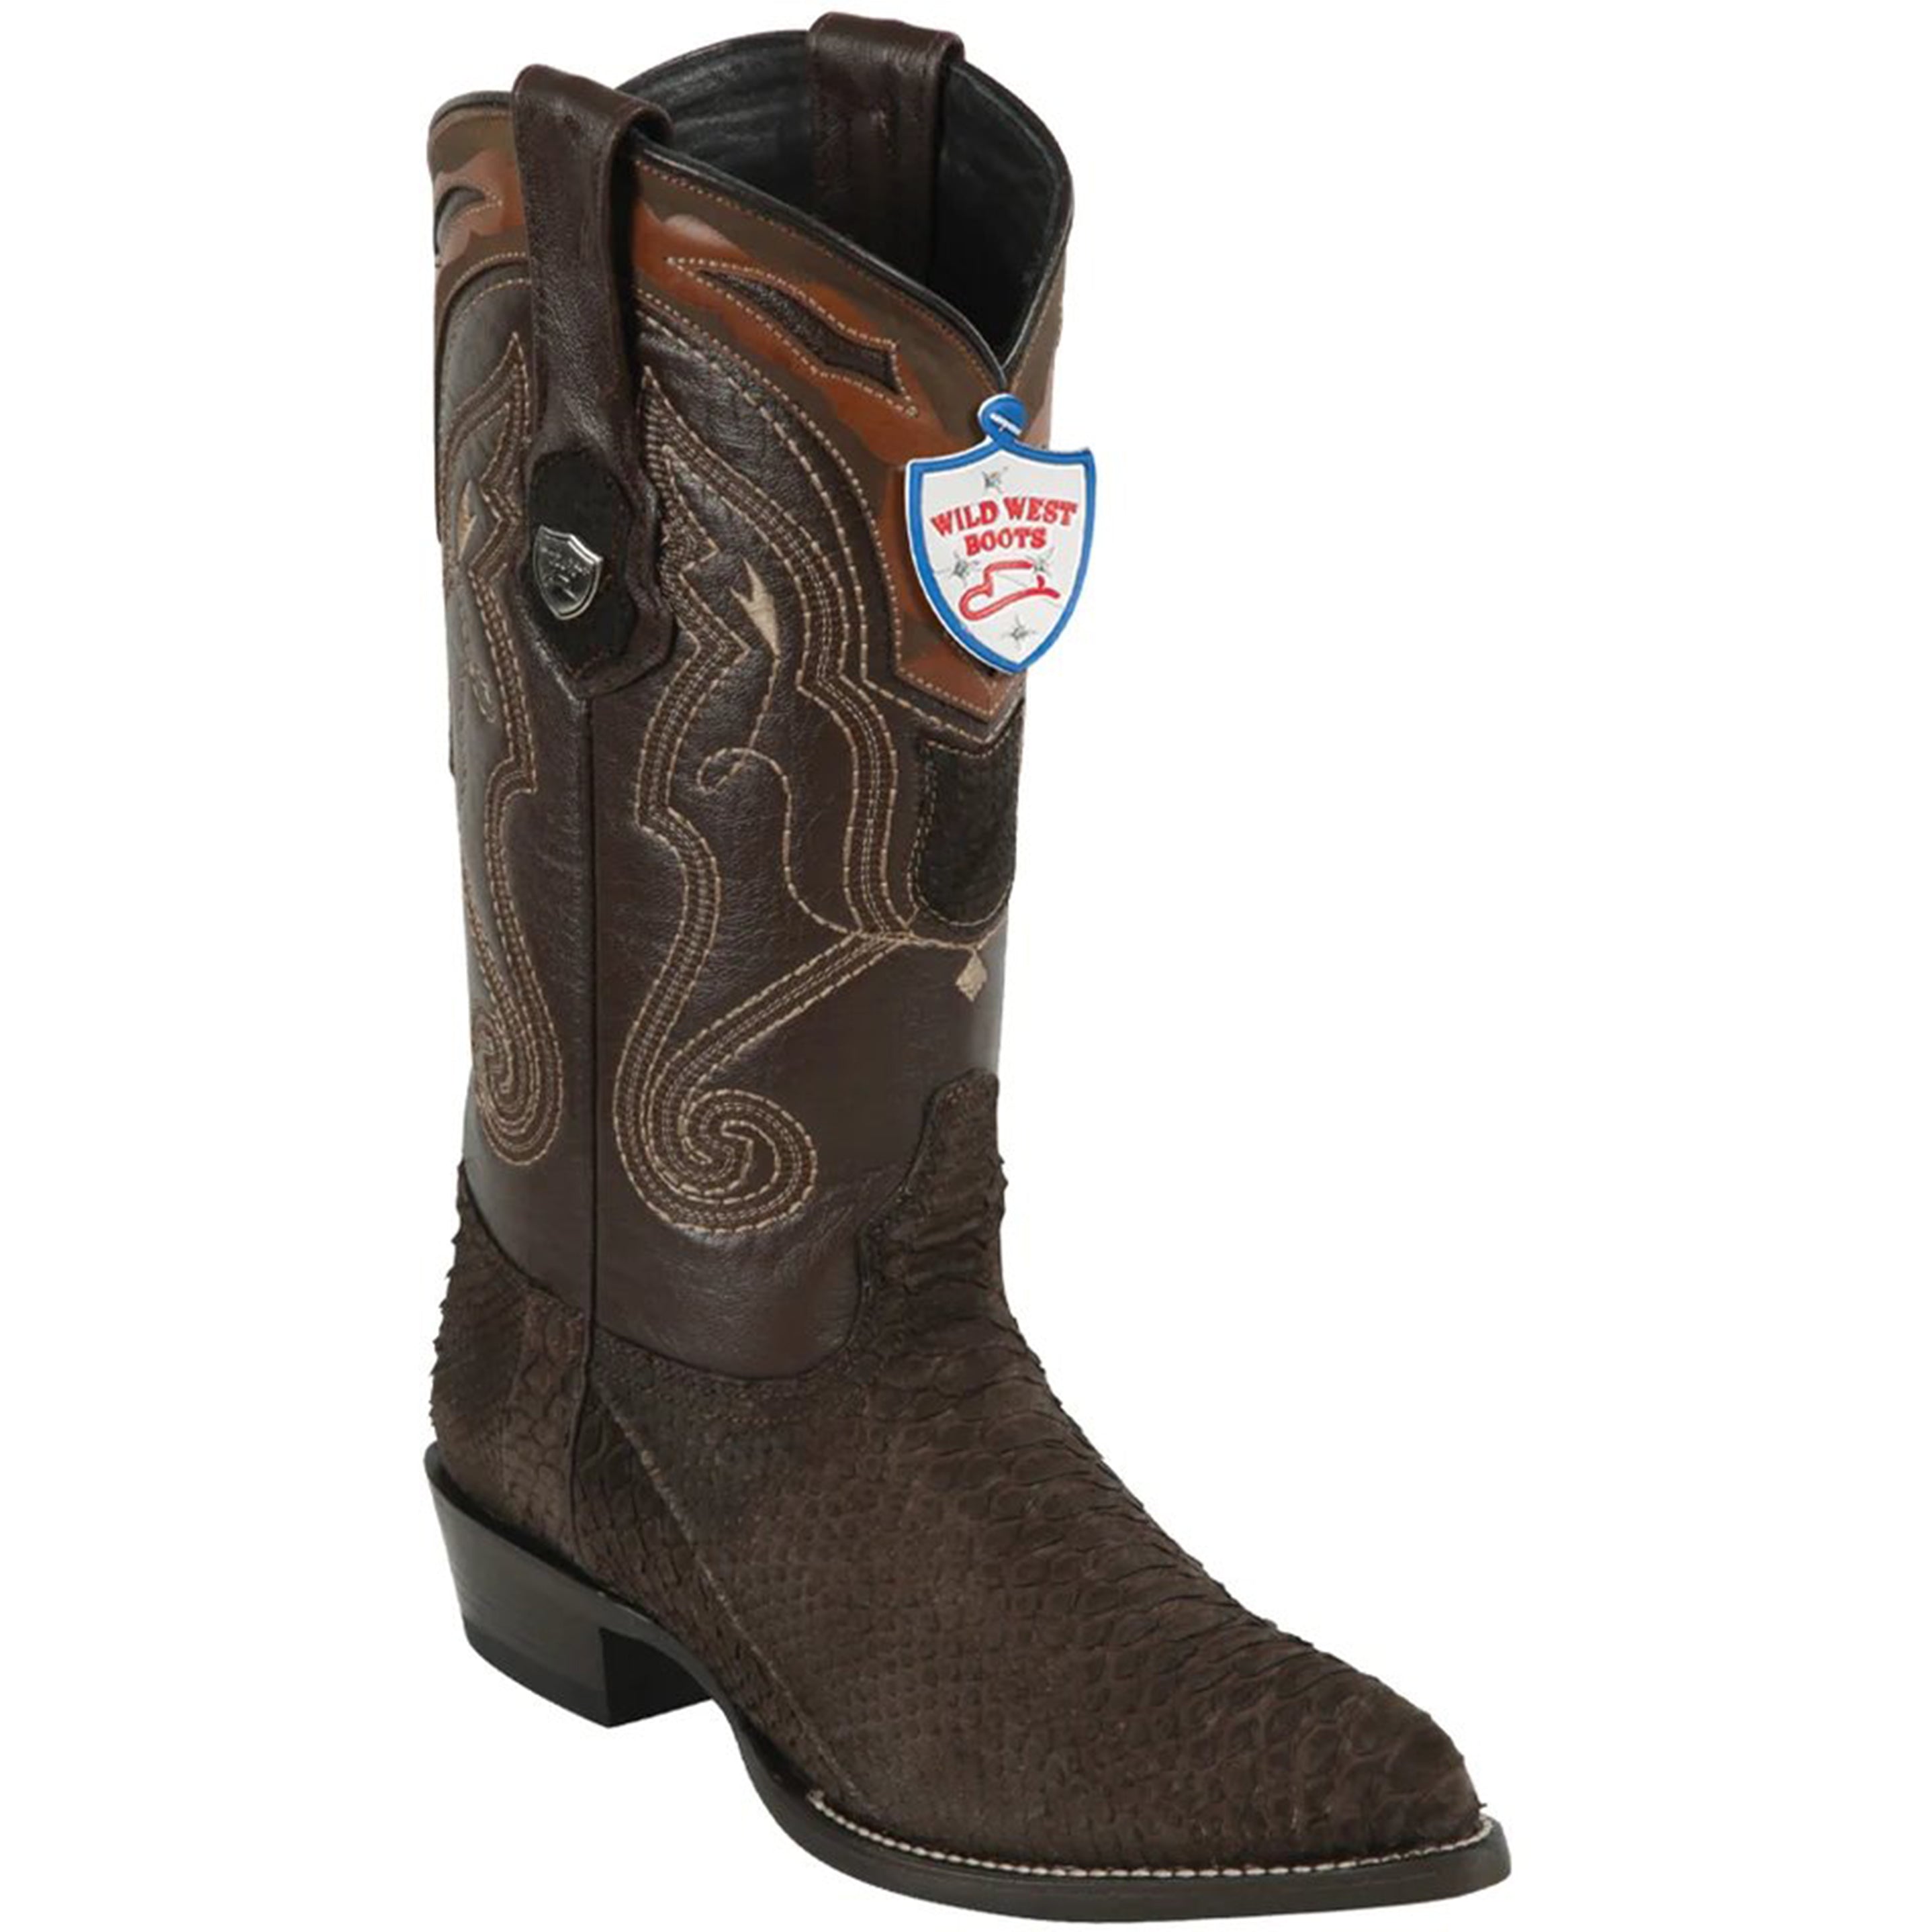 Mens Brown Snakeskin Boots J-Toe - Wild West Boots